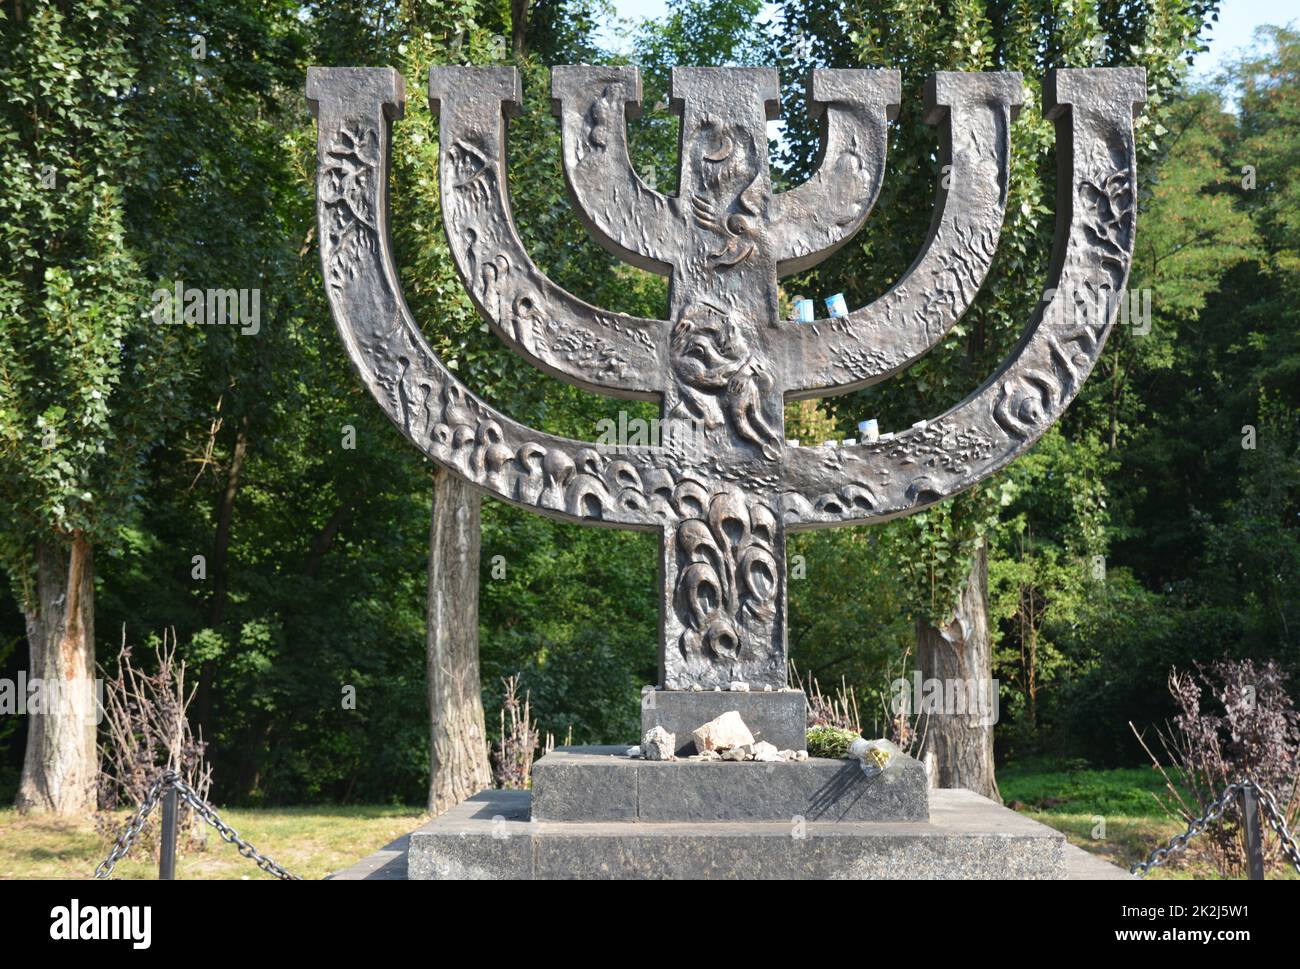 A menorah memorial dedicated to jewish people executed in 1941 in Babi Yar in Kiev by German forces. Holocaust. Stock Photo